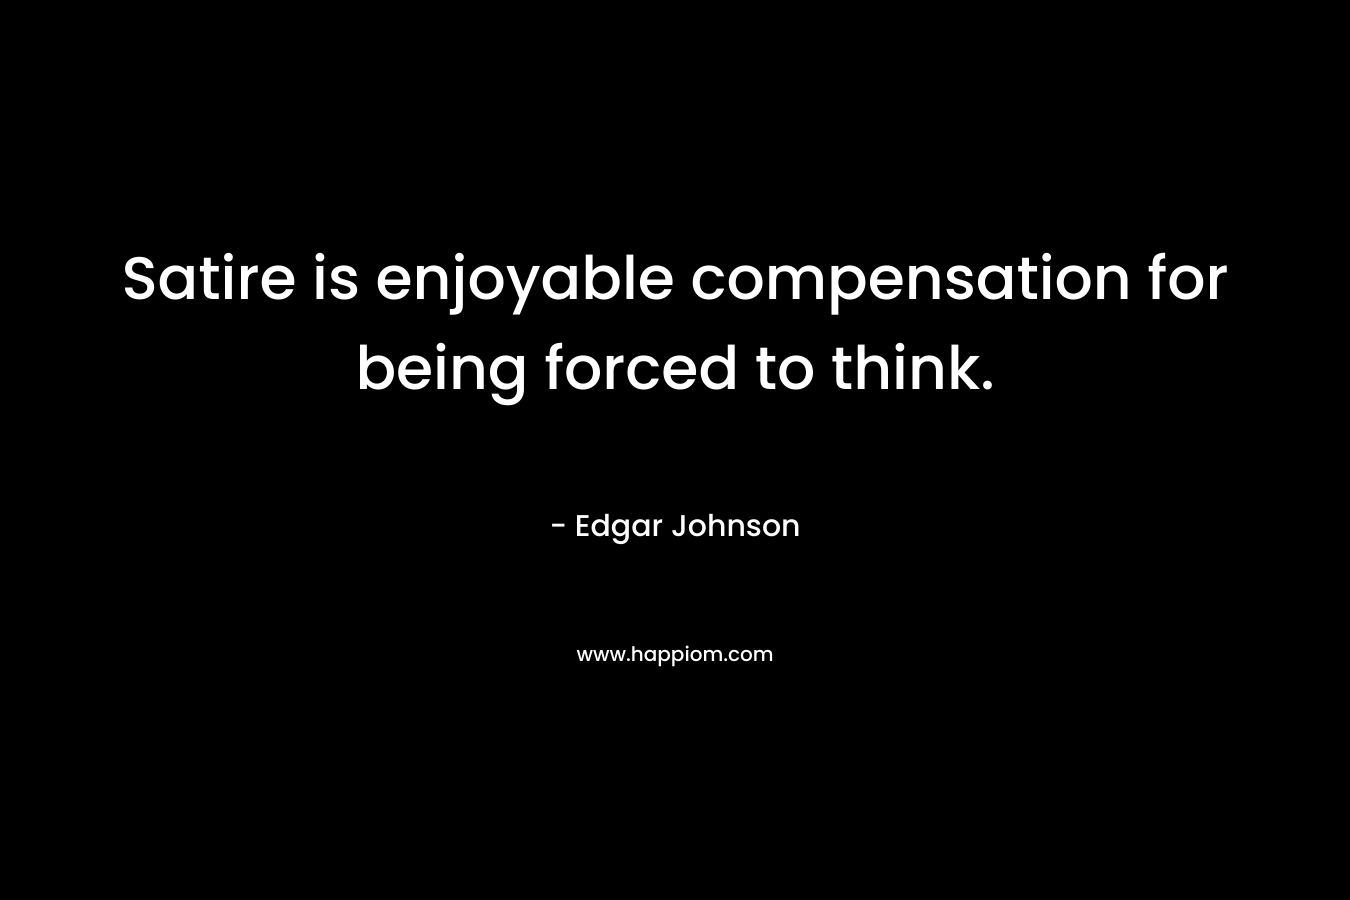 Satire is enjoyable compensation for being forced to think. – Edgar Johnson